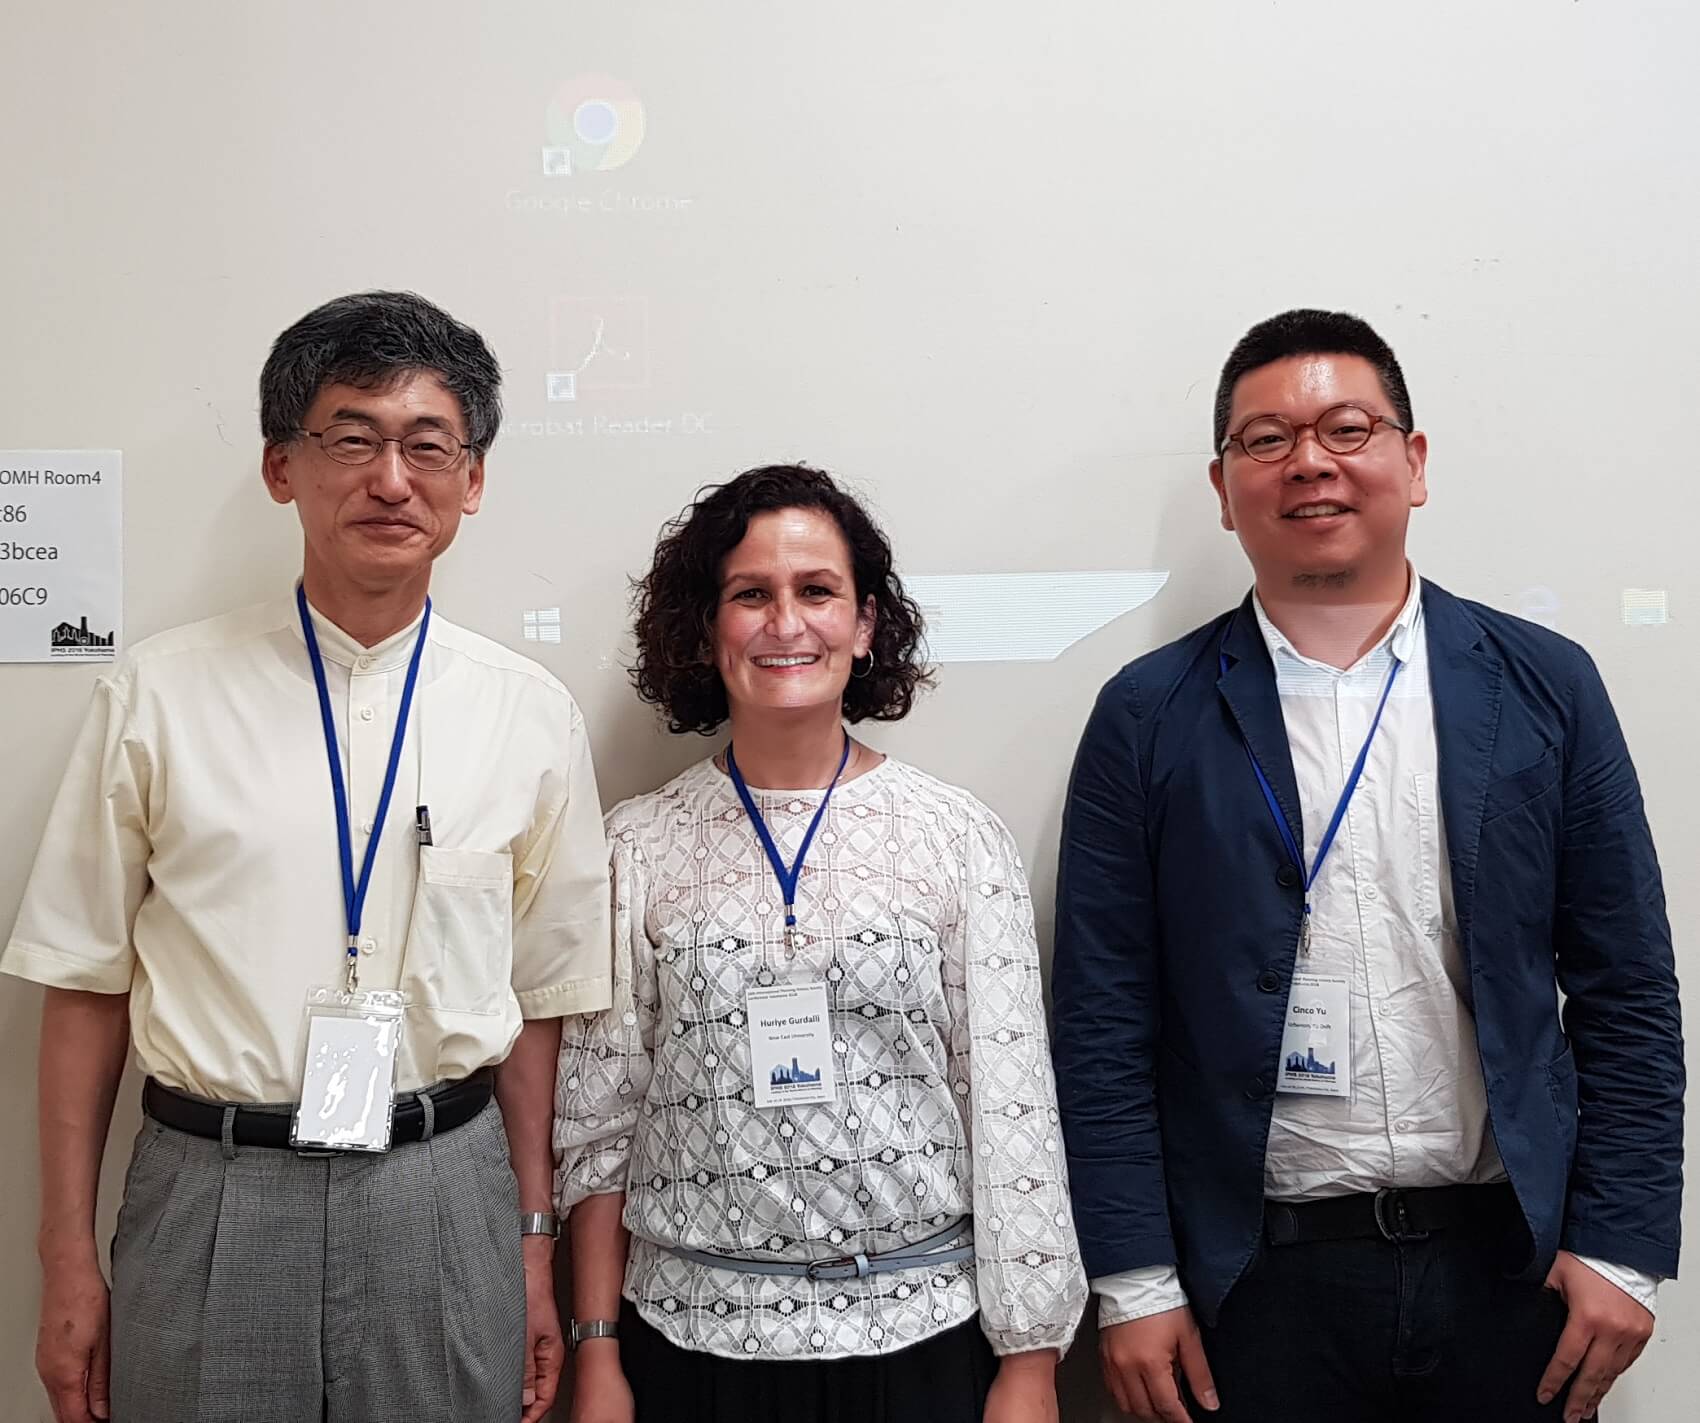 Near East University Faculty of Architecture represented Cyprus at the 18th International Planning History Society (IPHS) Conference in Japan